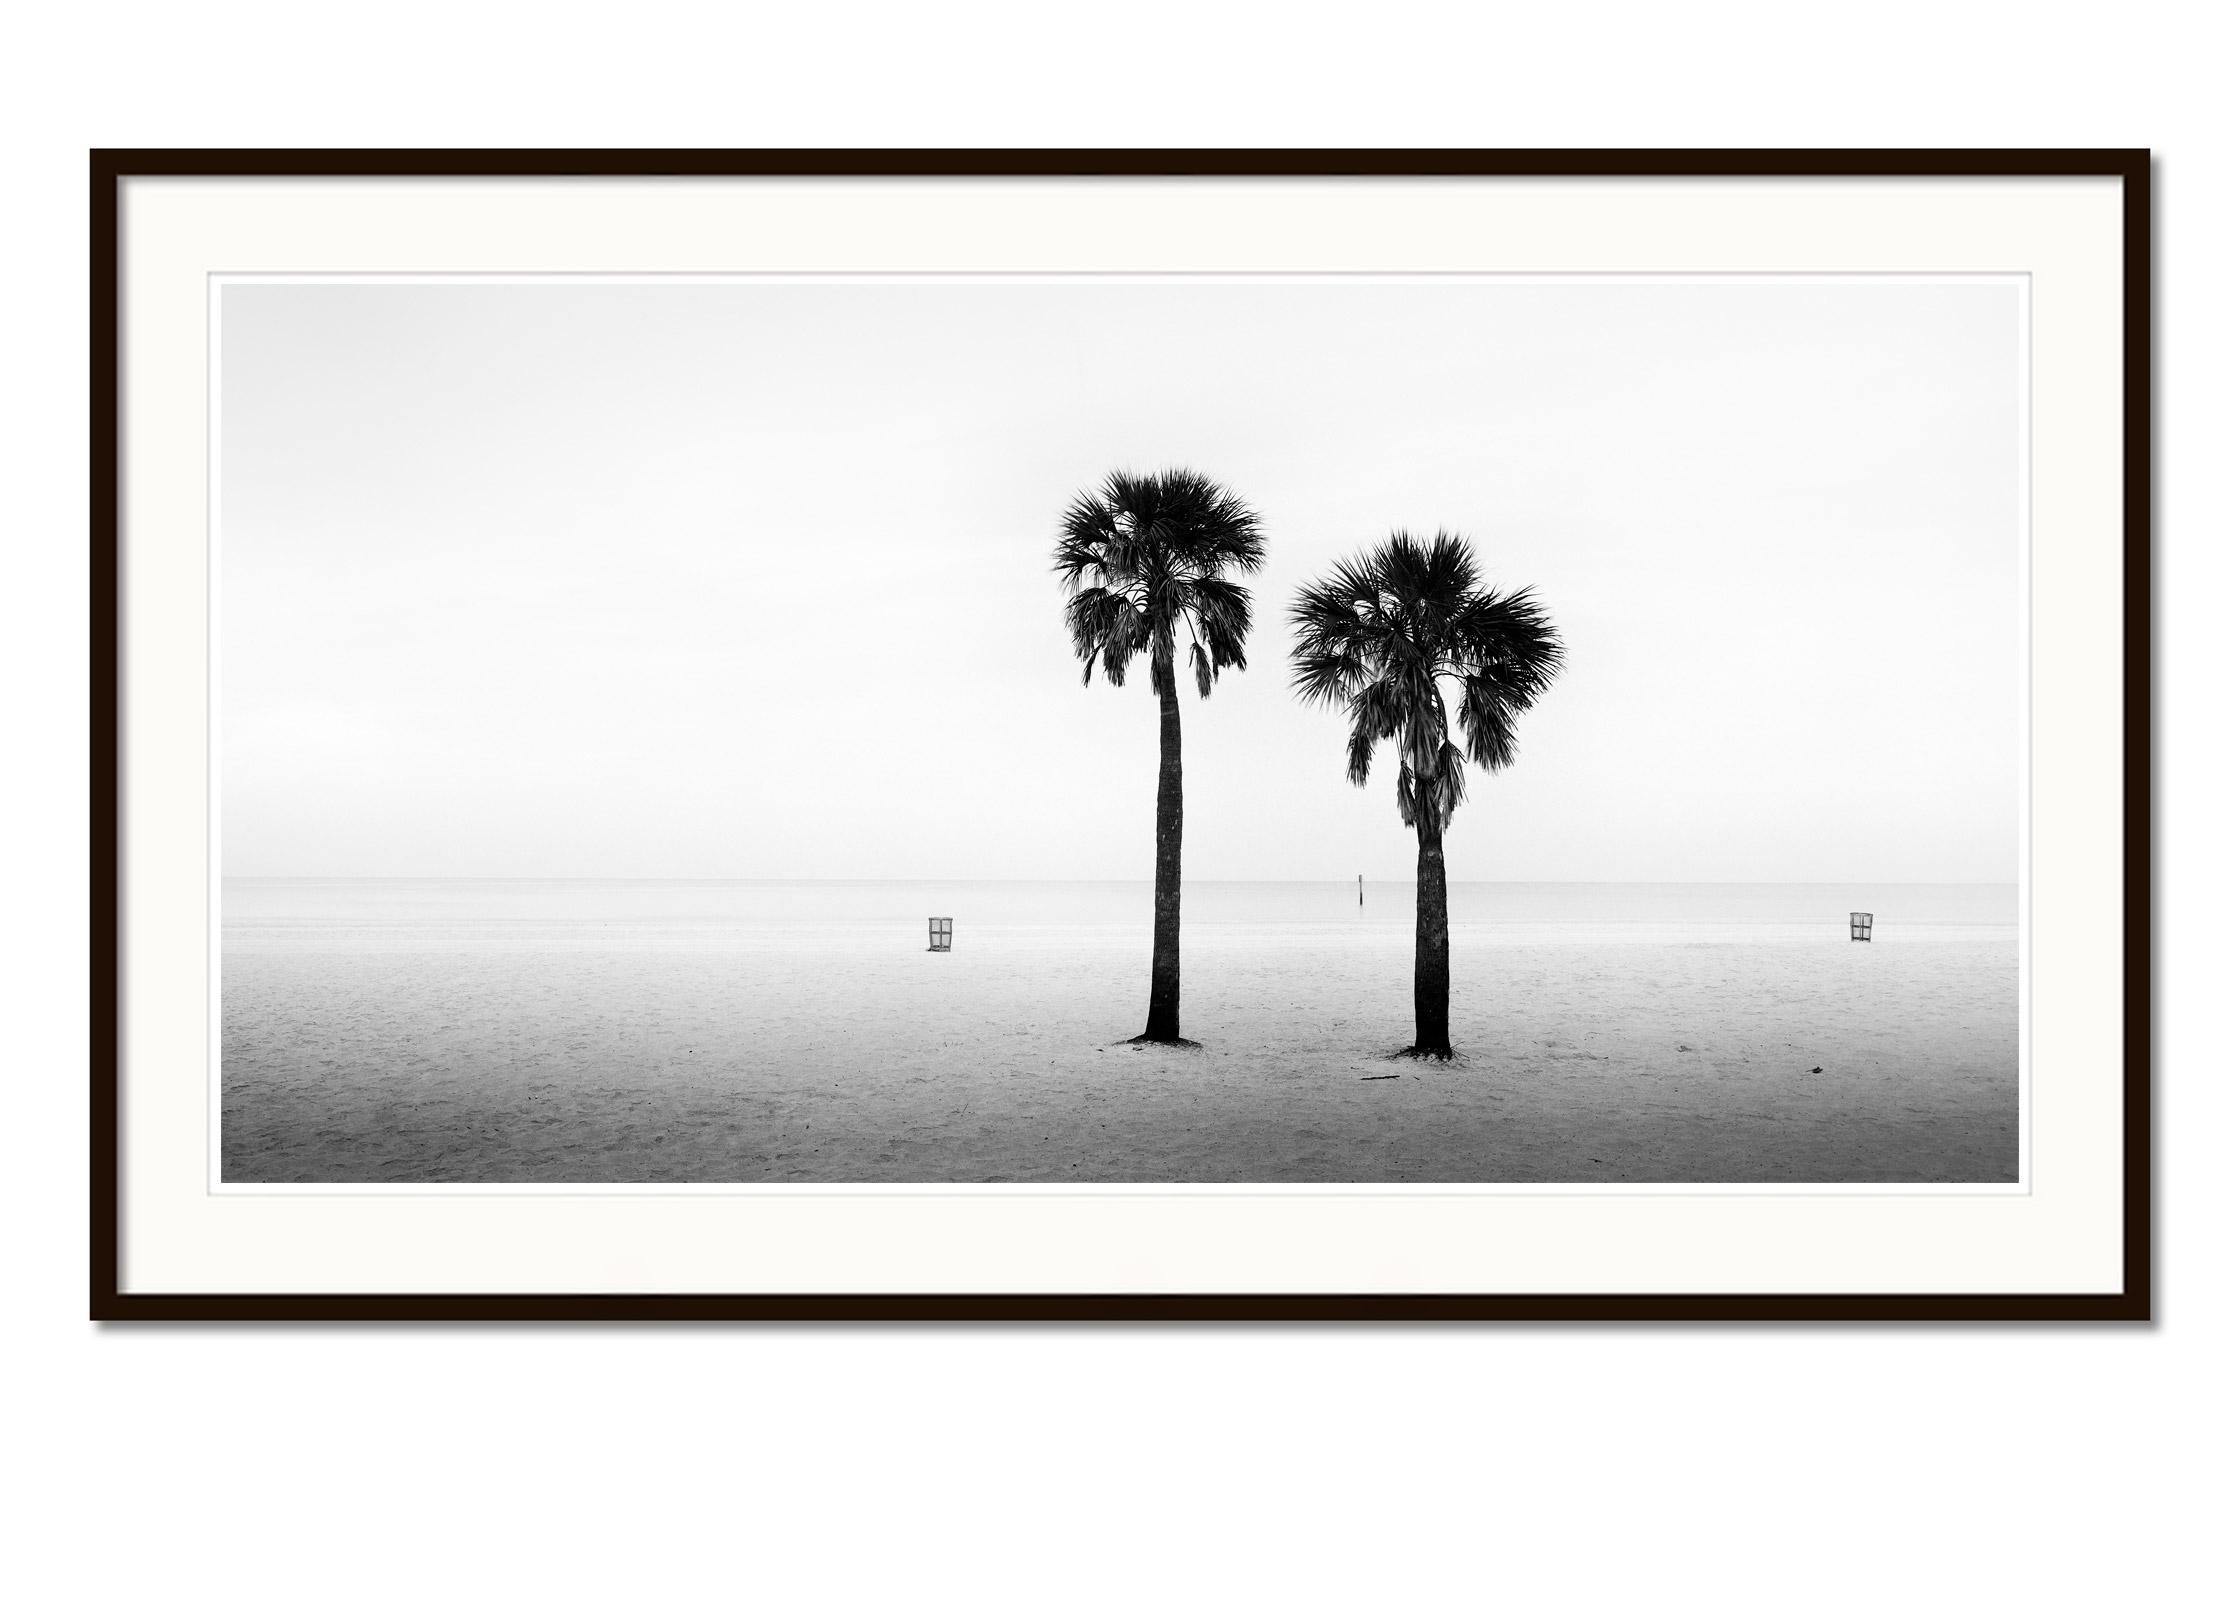 Two Palms, deserted beach, Florida, USA, Black and White landscape photography - Gray Black and White Photograph by Gerald Berghammer